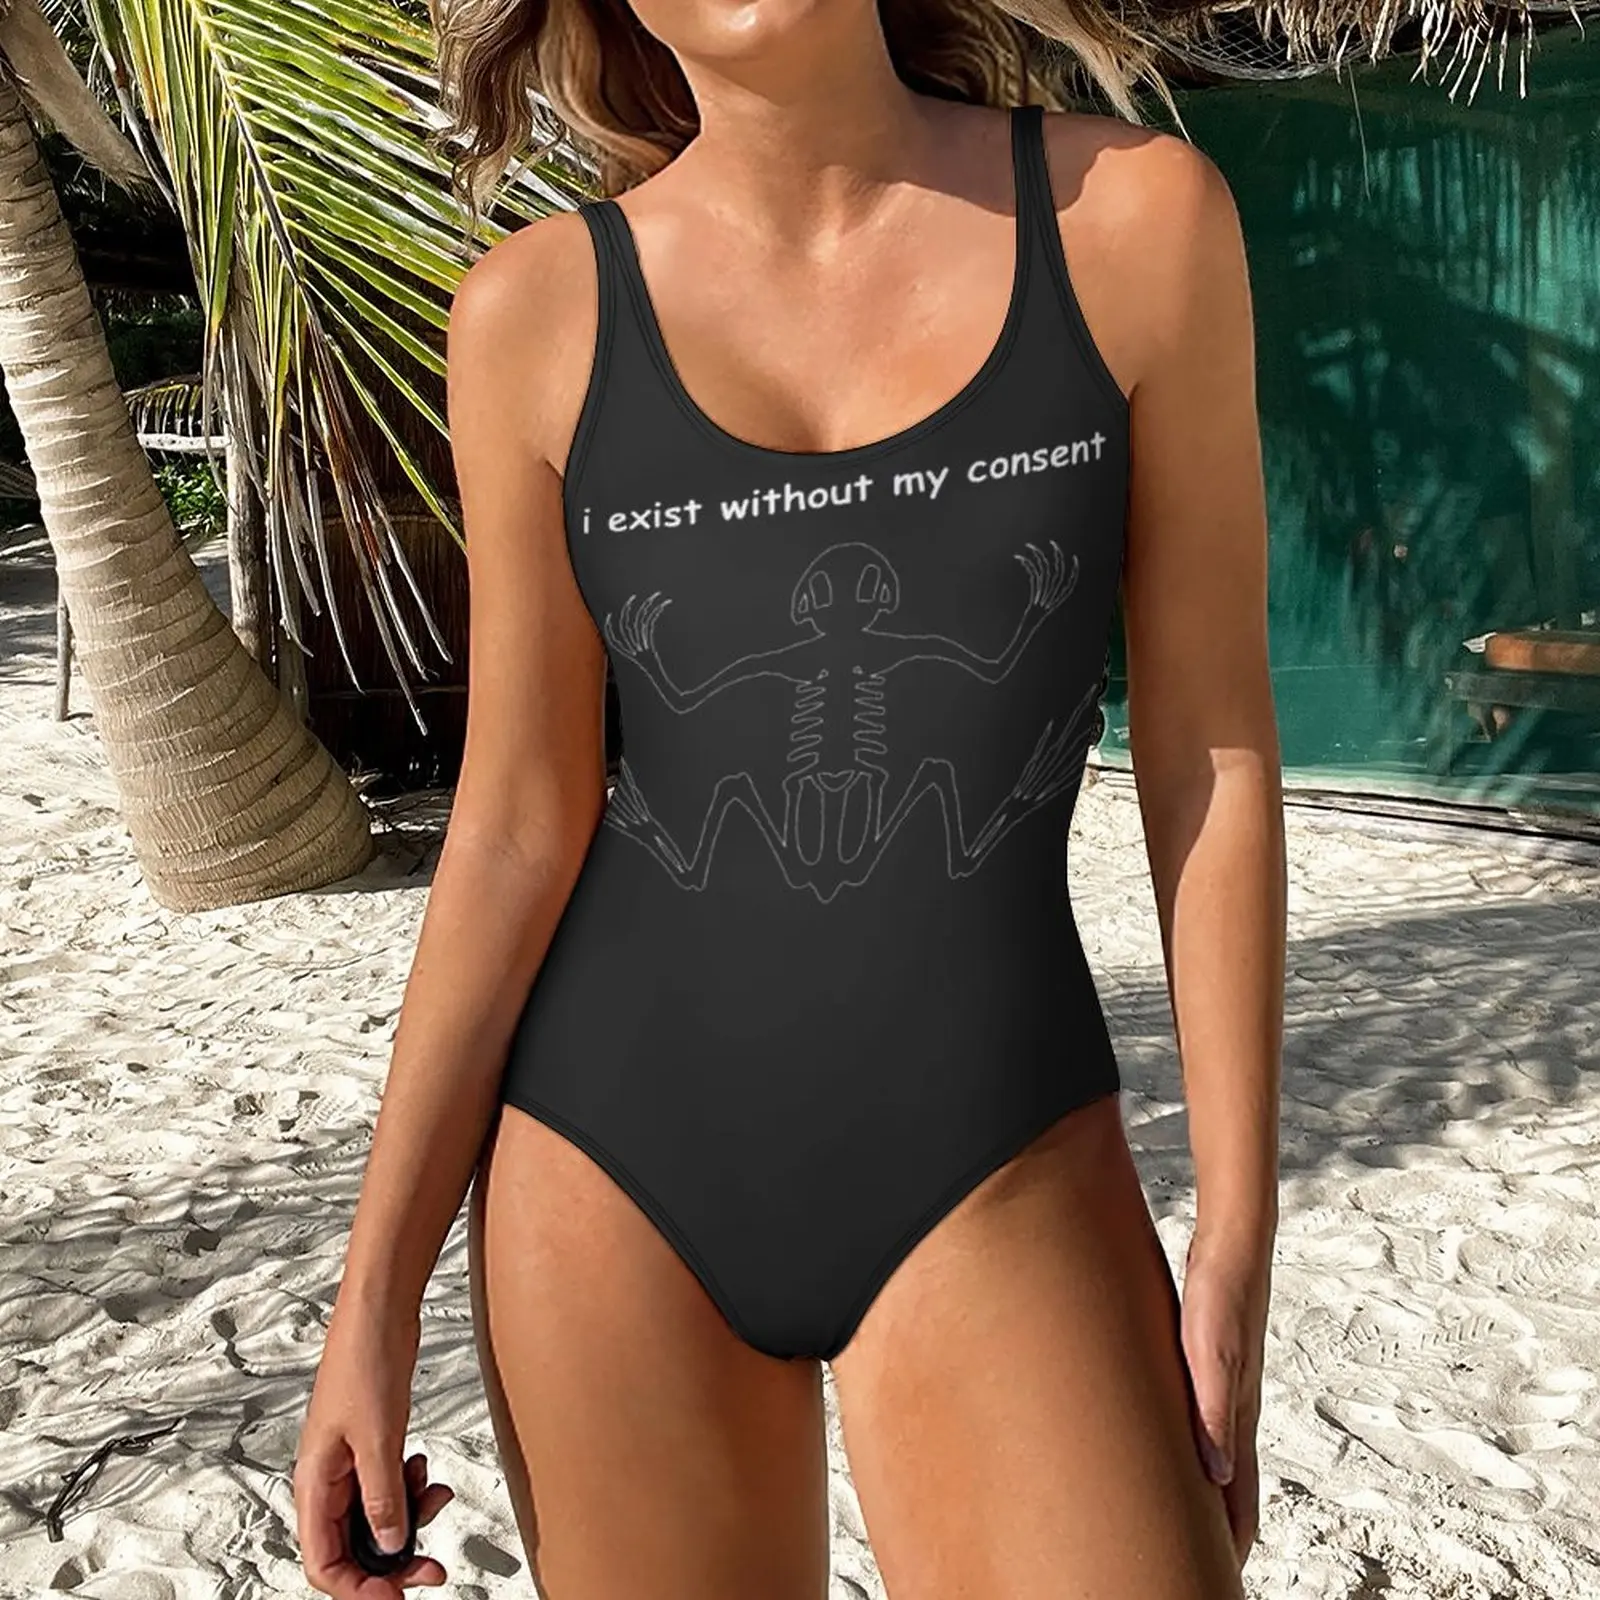 

I Exist Without My Consent Frog 2 One-piece Swimsuit Graphic Sexy Women's Bikinis Novelty Beach Top Quality Swimwear